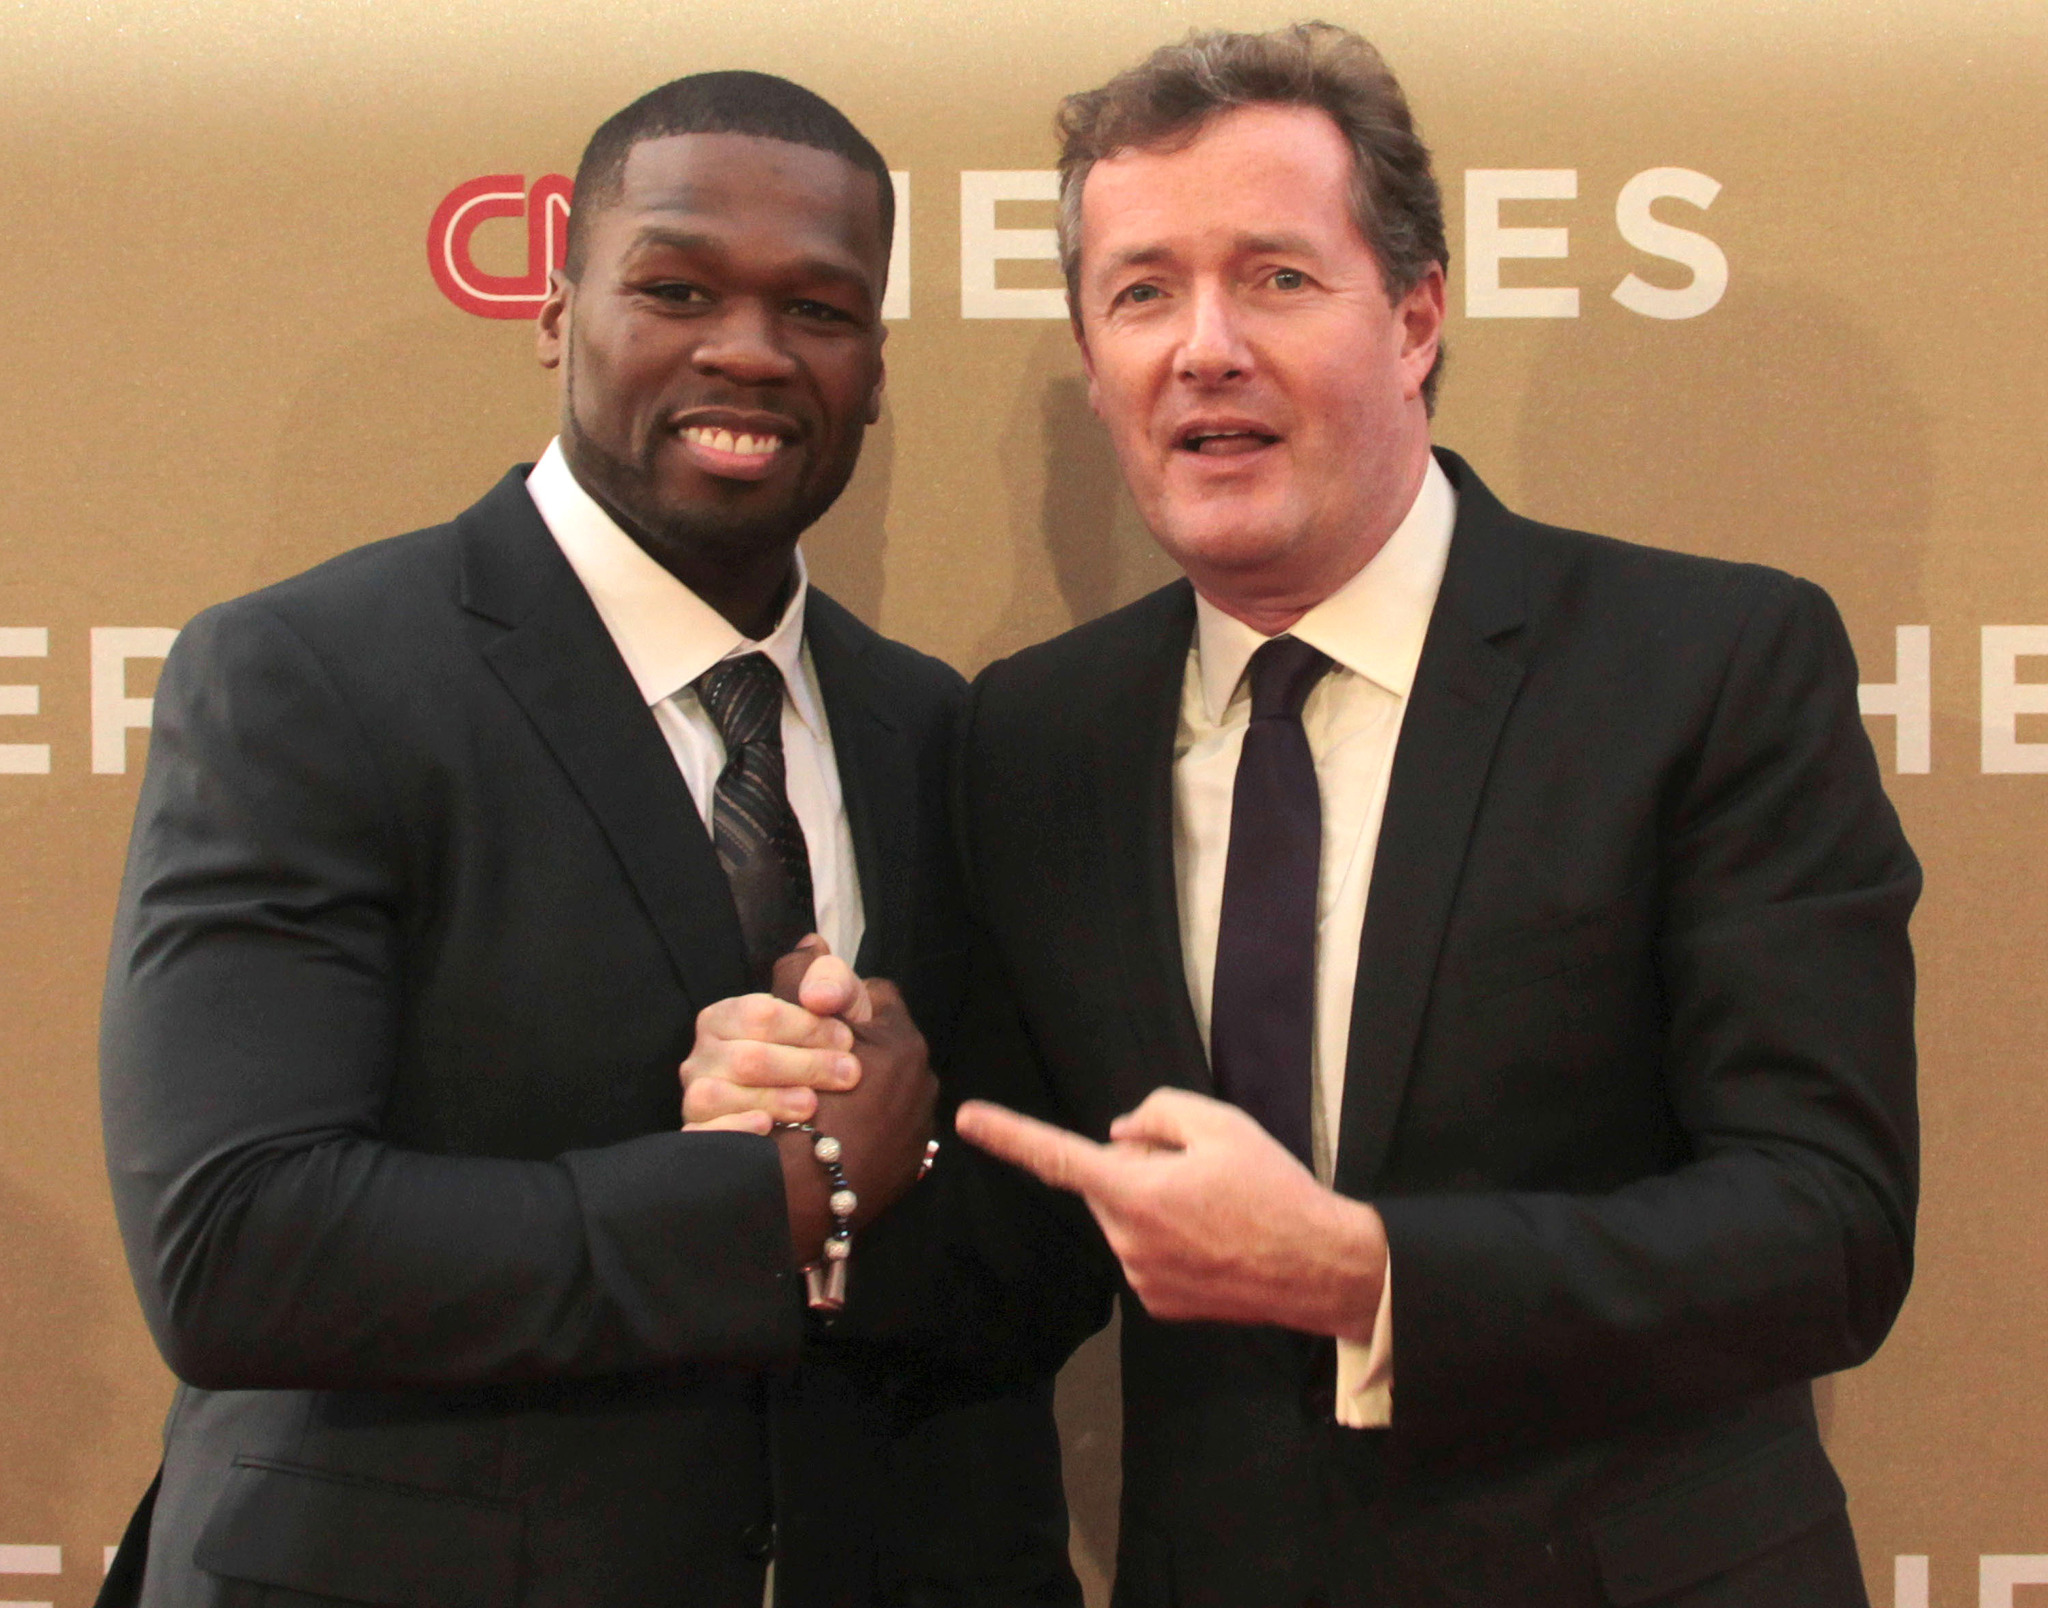 Charlotte Ross, Piers Morgan and 50 Cent